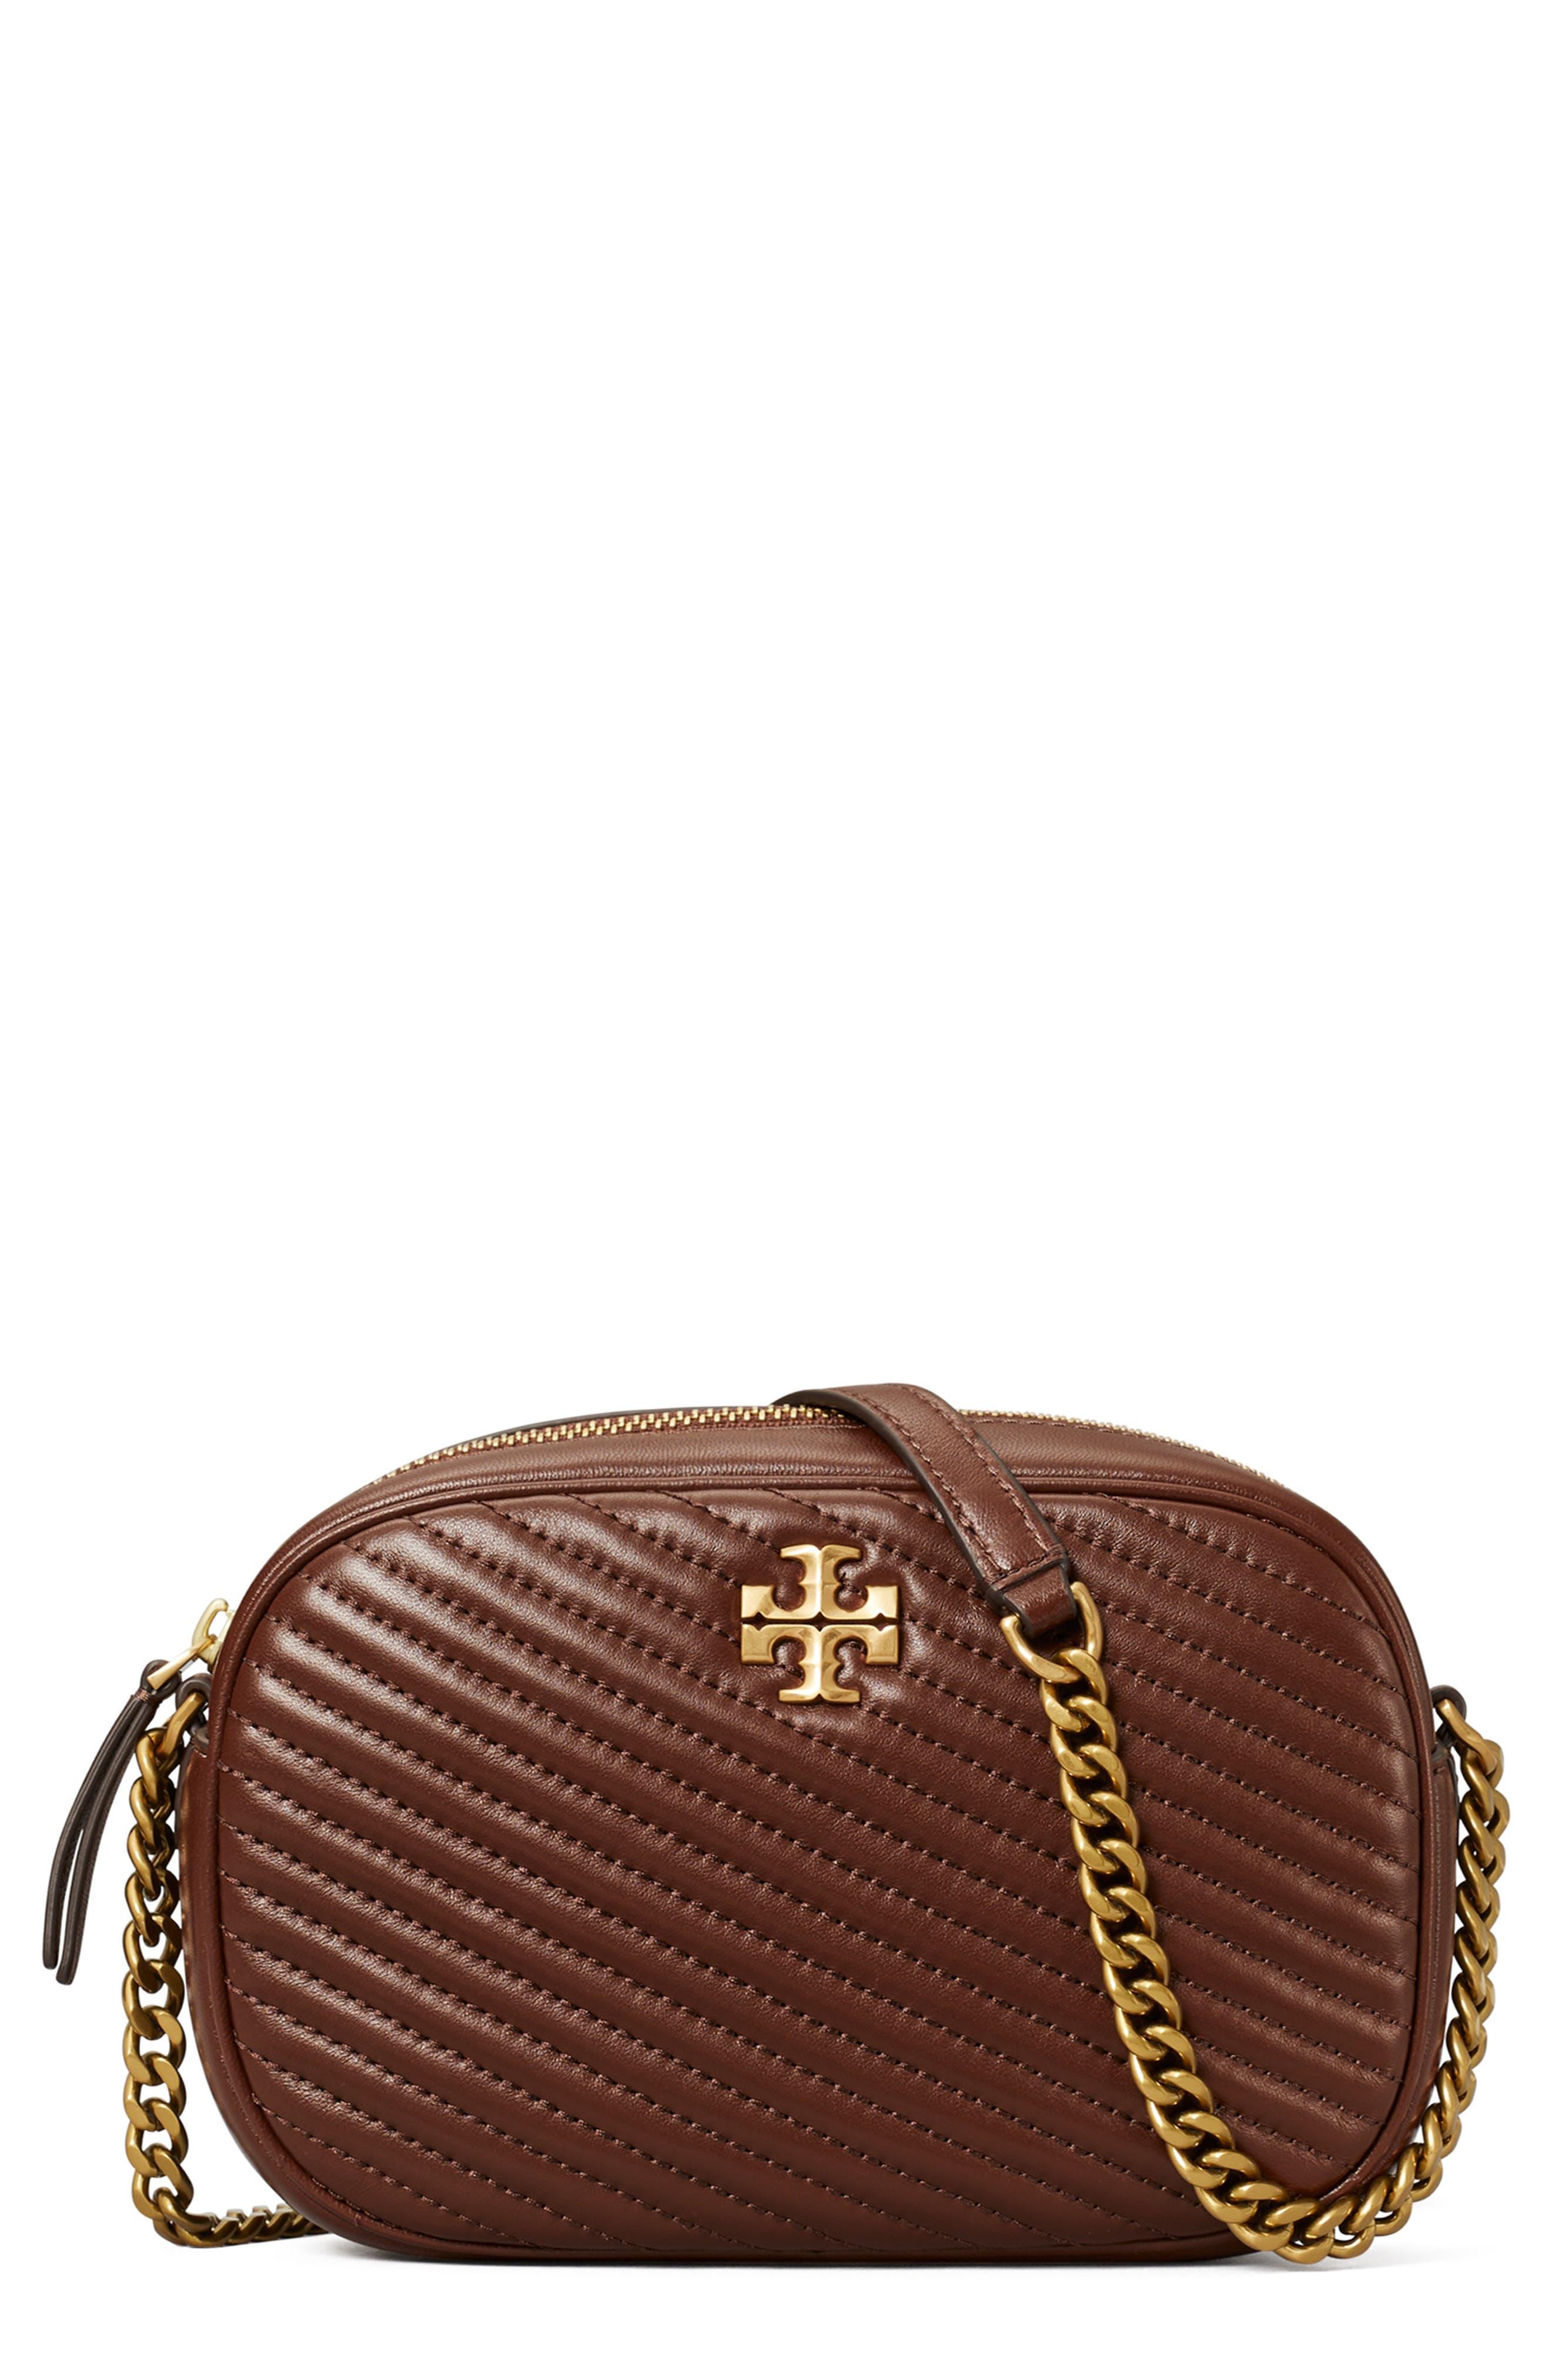 Tory Burch Kira Chevron Quilted Camera Bag in Brown | Lyst